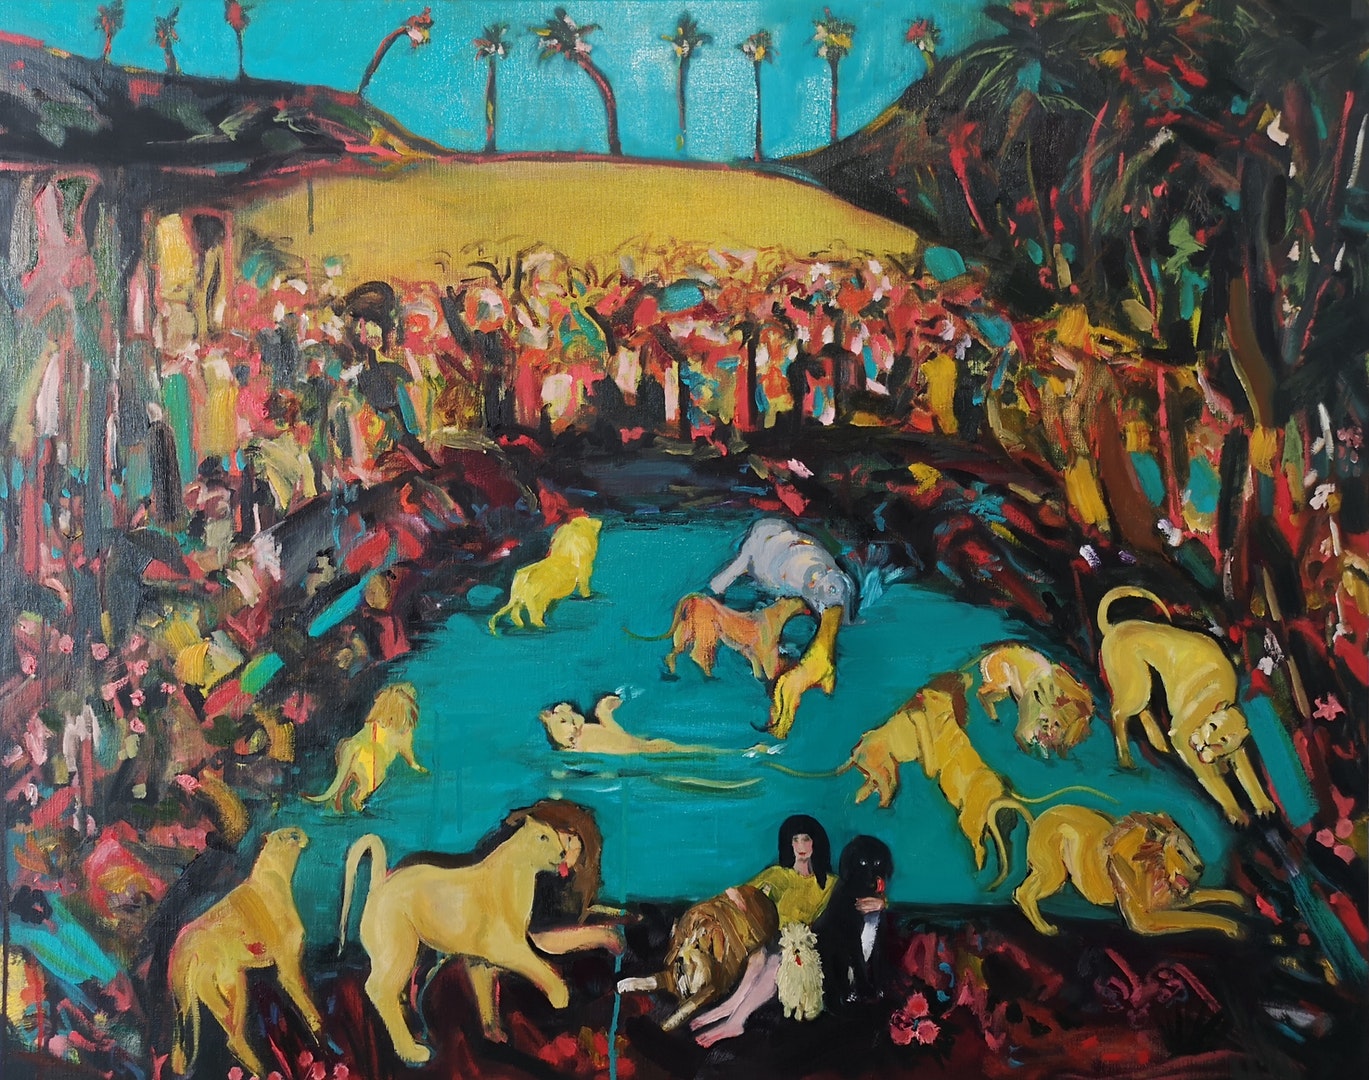 'In a Lion's Den, Playing', Serena Caulfield, Oil on canvas, 80 x 100 cm